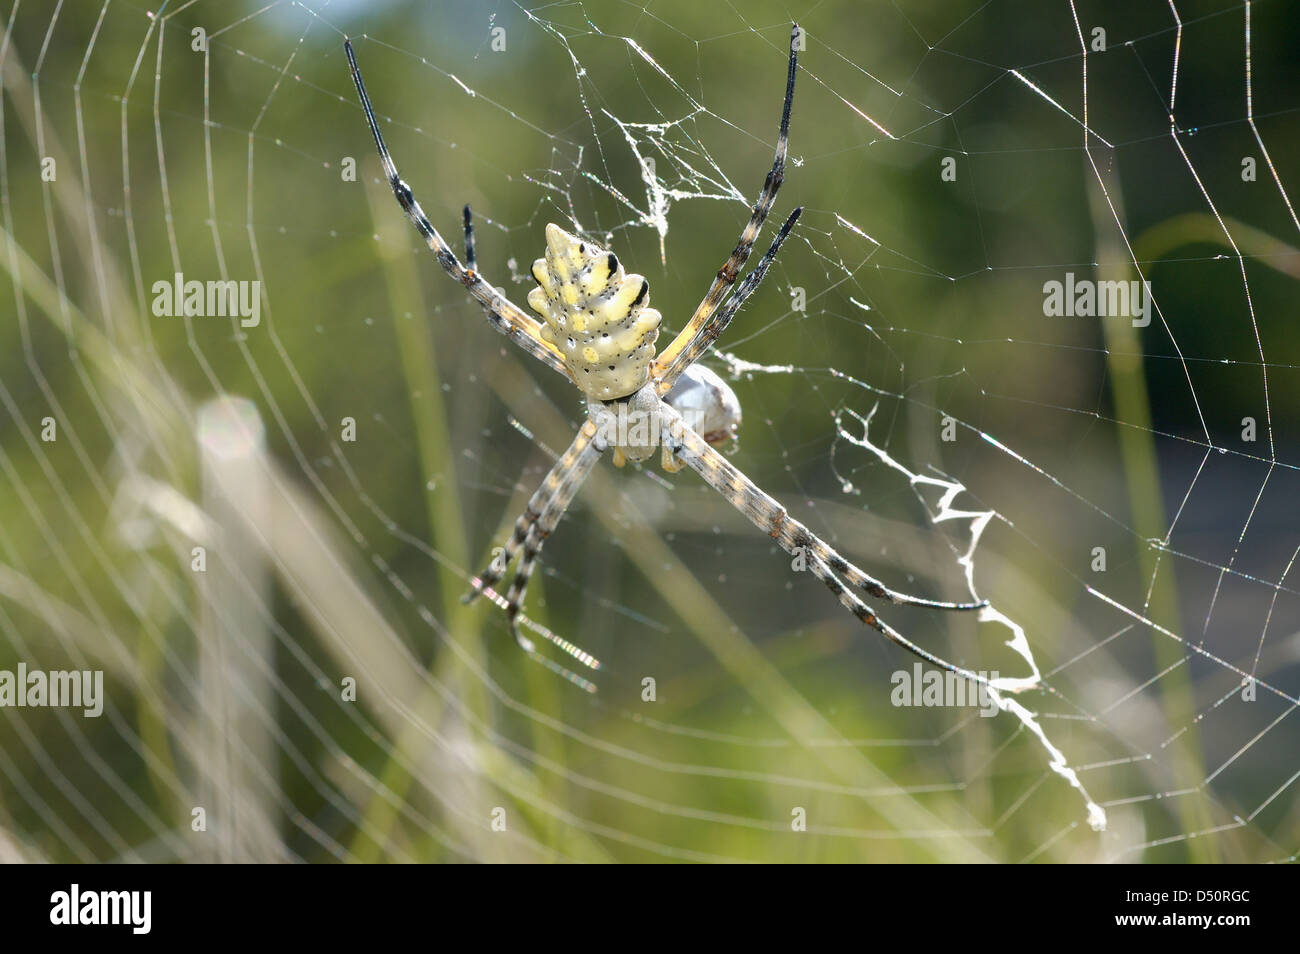 Lobed argiope spider (Argiope lobata: Araneidae) with wrapped prey in its web, Namibia. Stock Photo